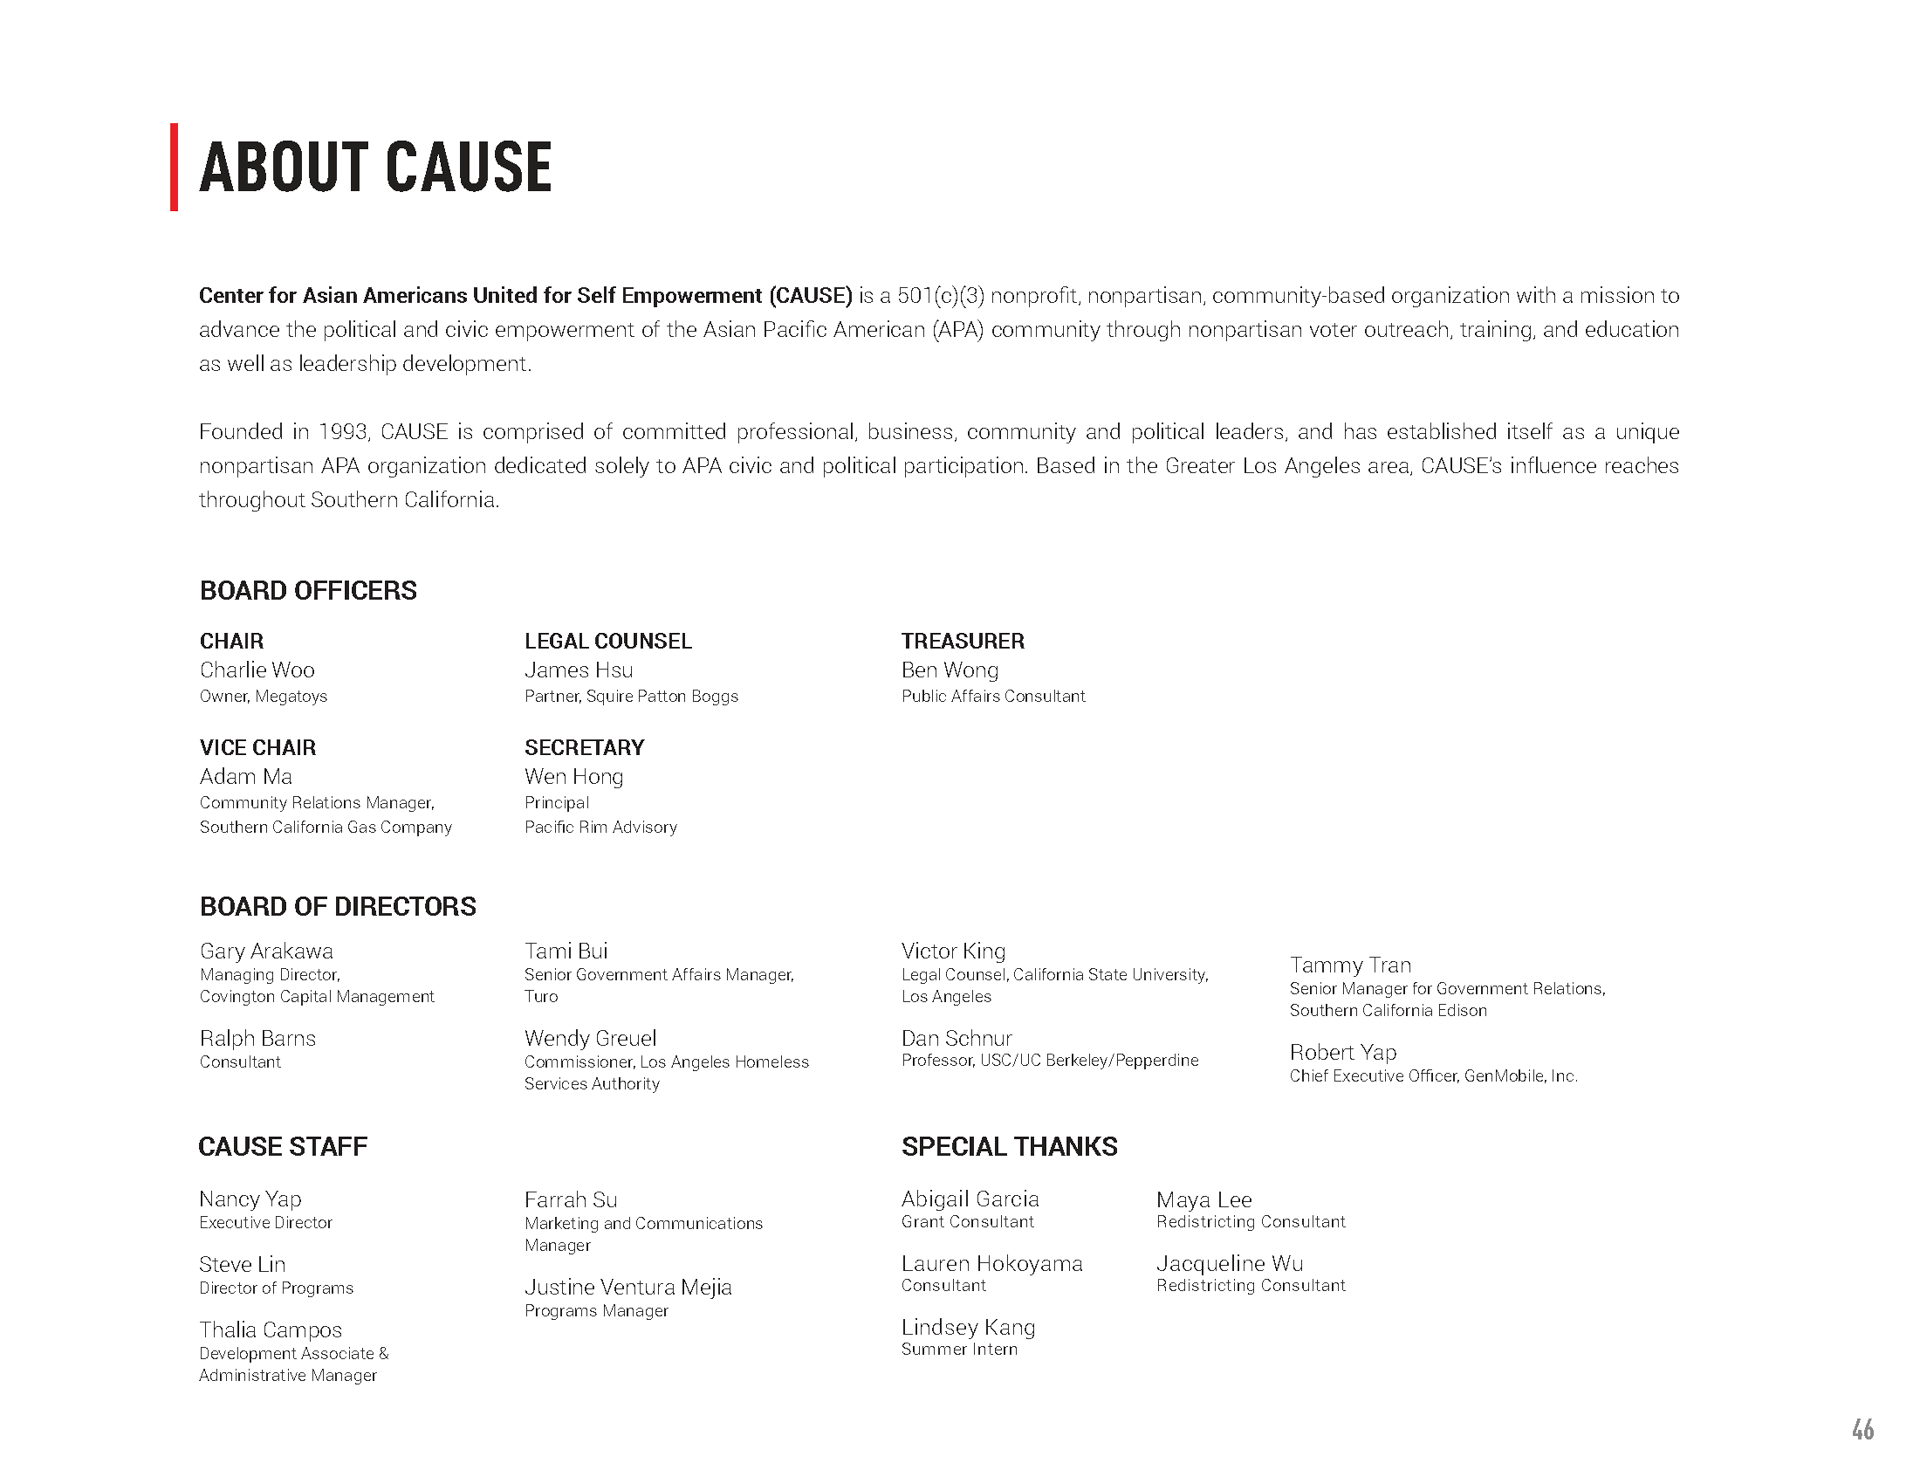 2021 CAUSE Annual Report_Page_46-3.png